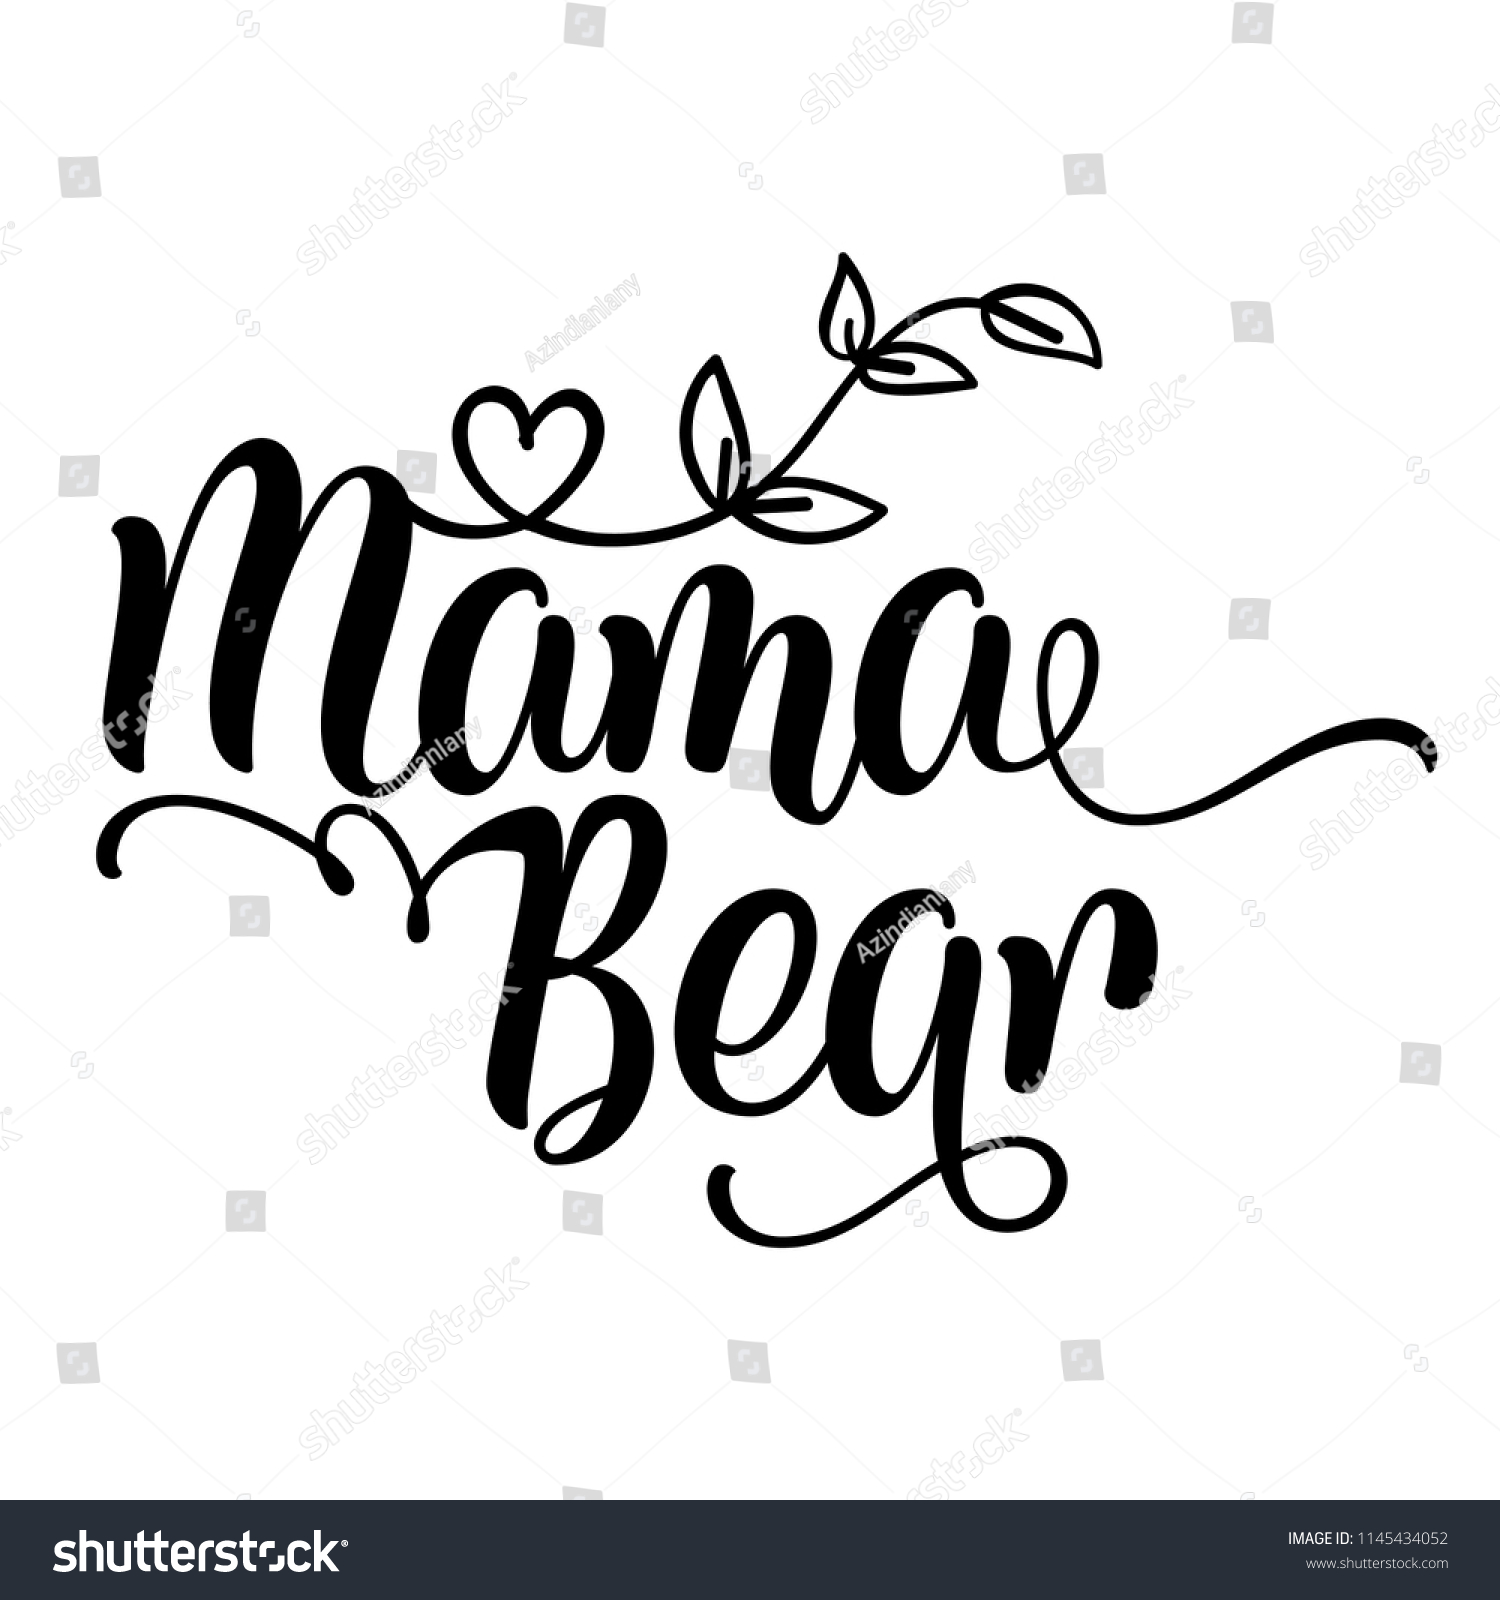 SVG of Mama Bear - Handmade calligraphy vector quote. Good for Mother's day gift or scrap booking, posters, textiles, gifts. svg